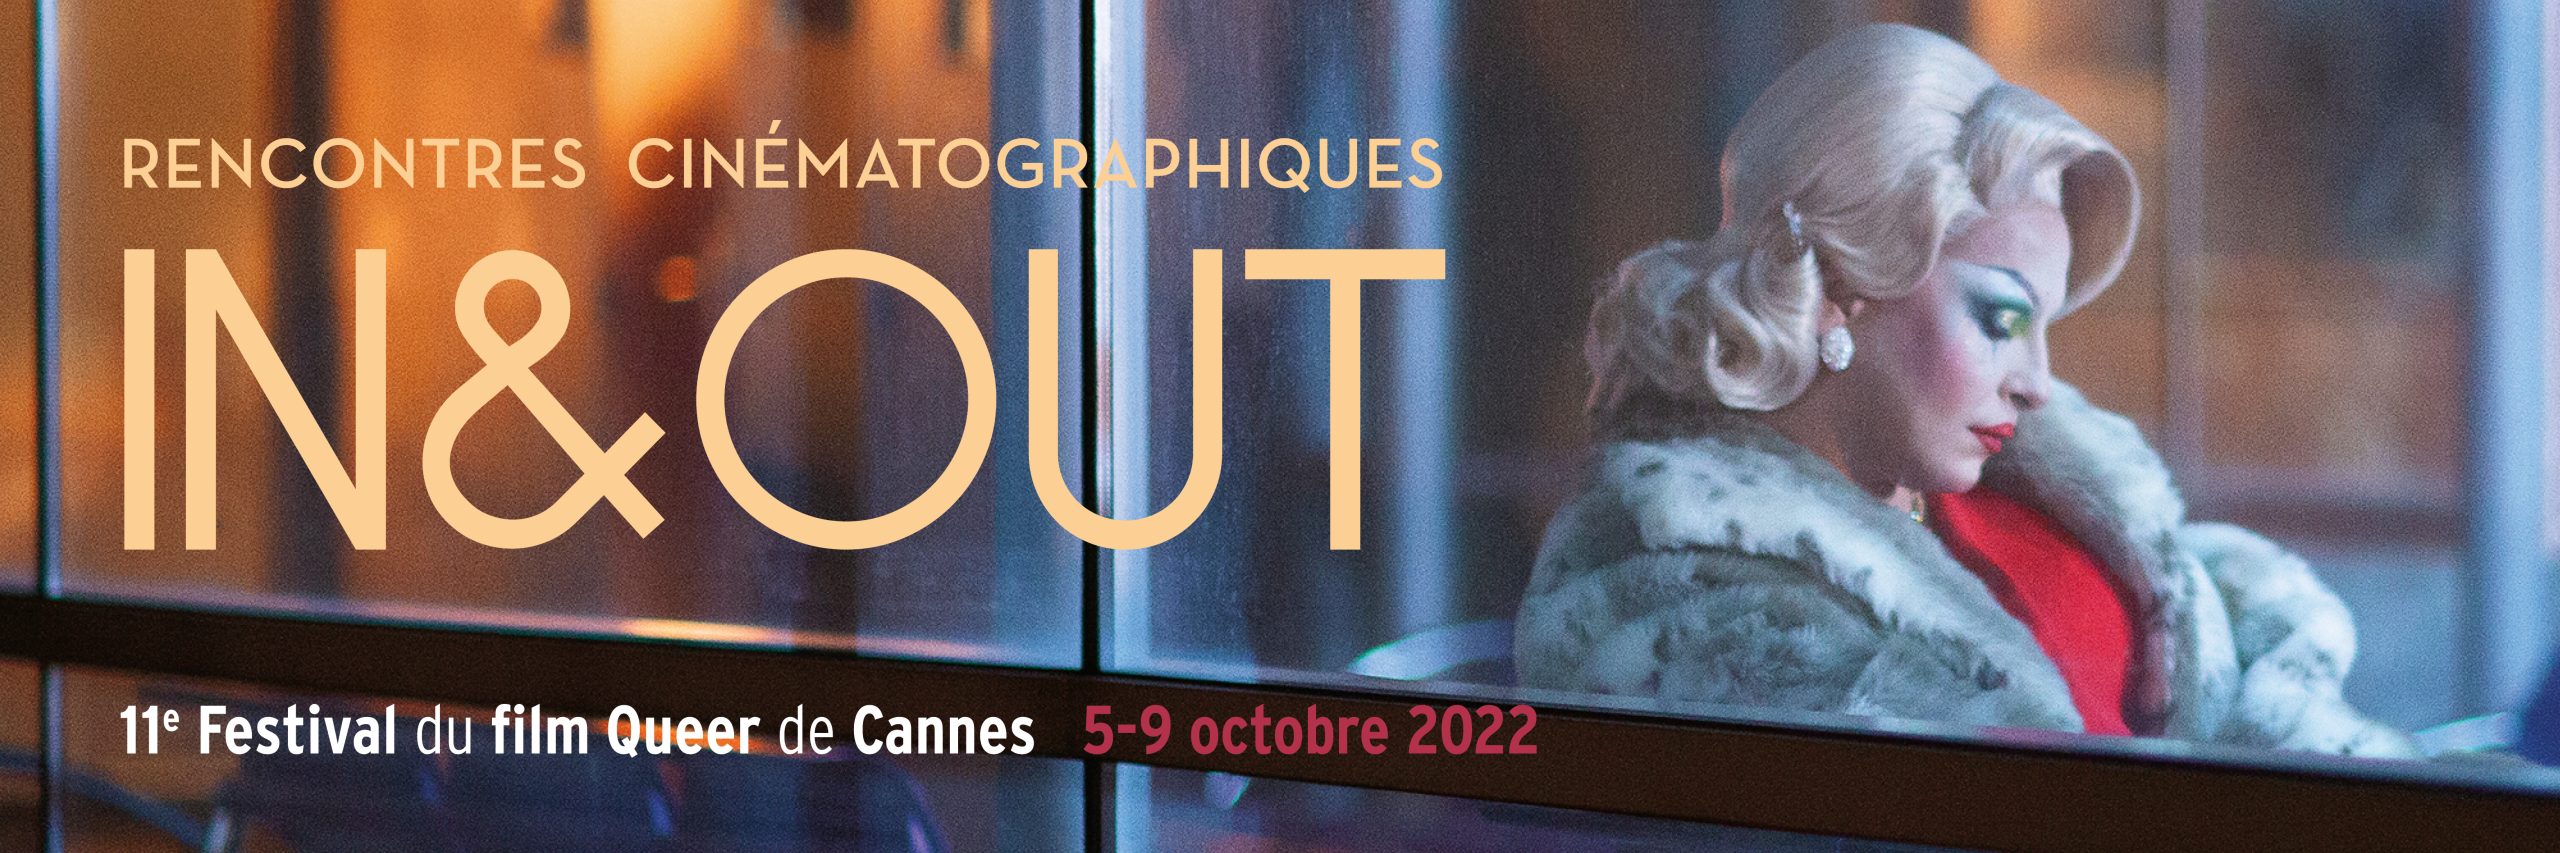 BANNIERE IN&OUT CANNES 2022